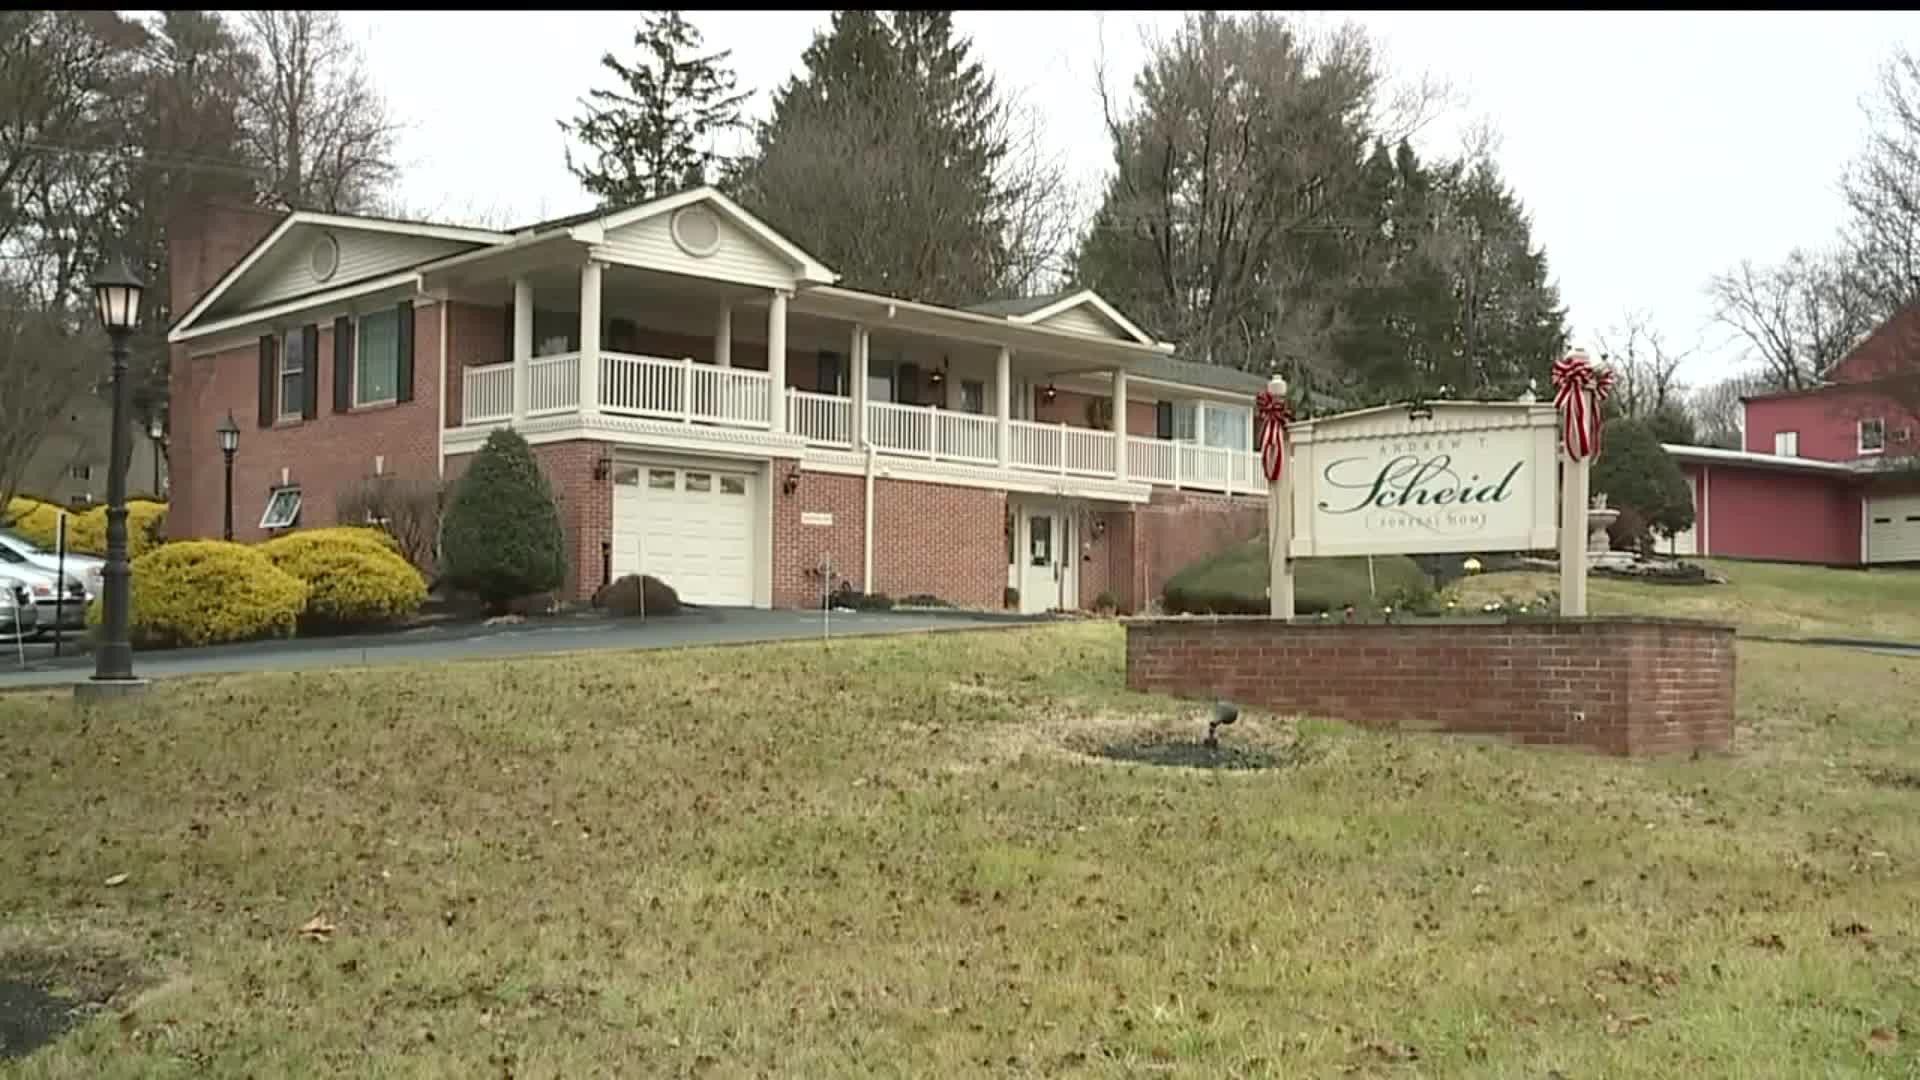 `A mess`: Employee, customers react to allegations against Andrew T. Scheid Funeral Home in Lancaster County